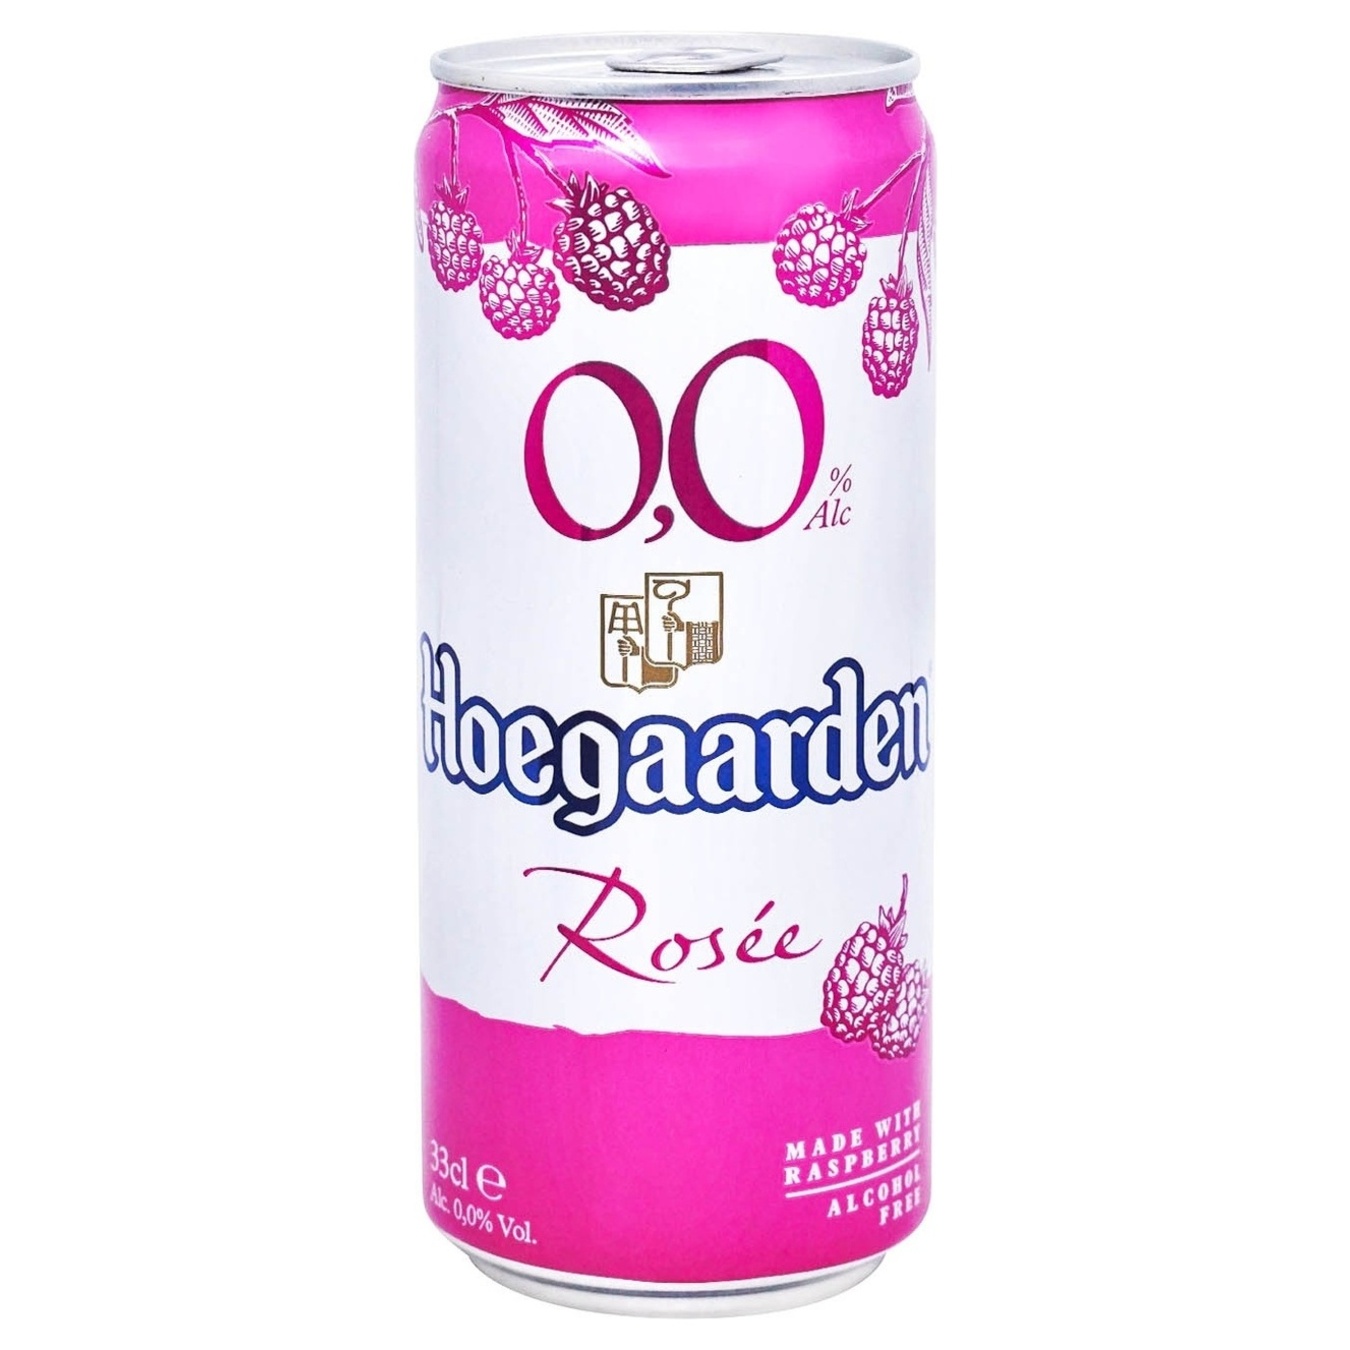 Non-alcoholic beer Hoegaarden Rose 0% 0.33 l iron can